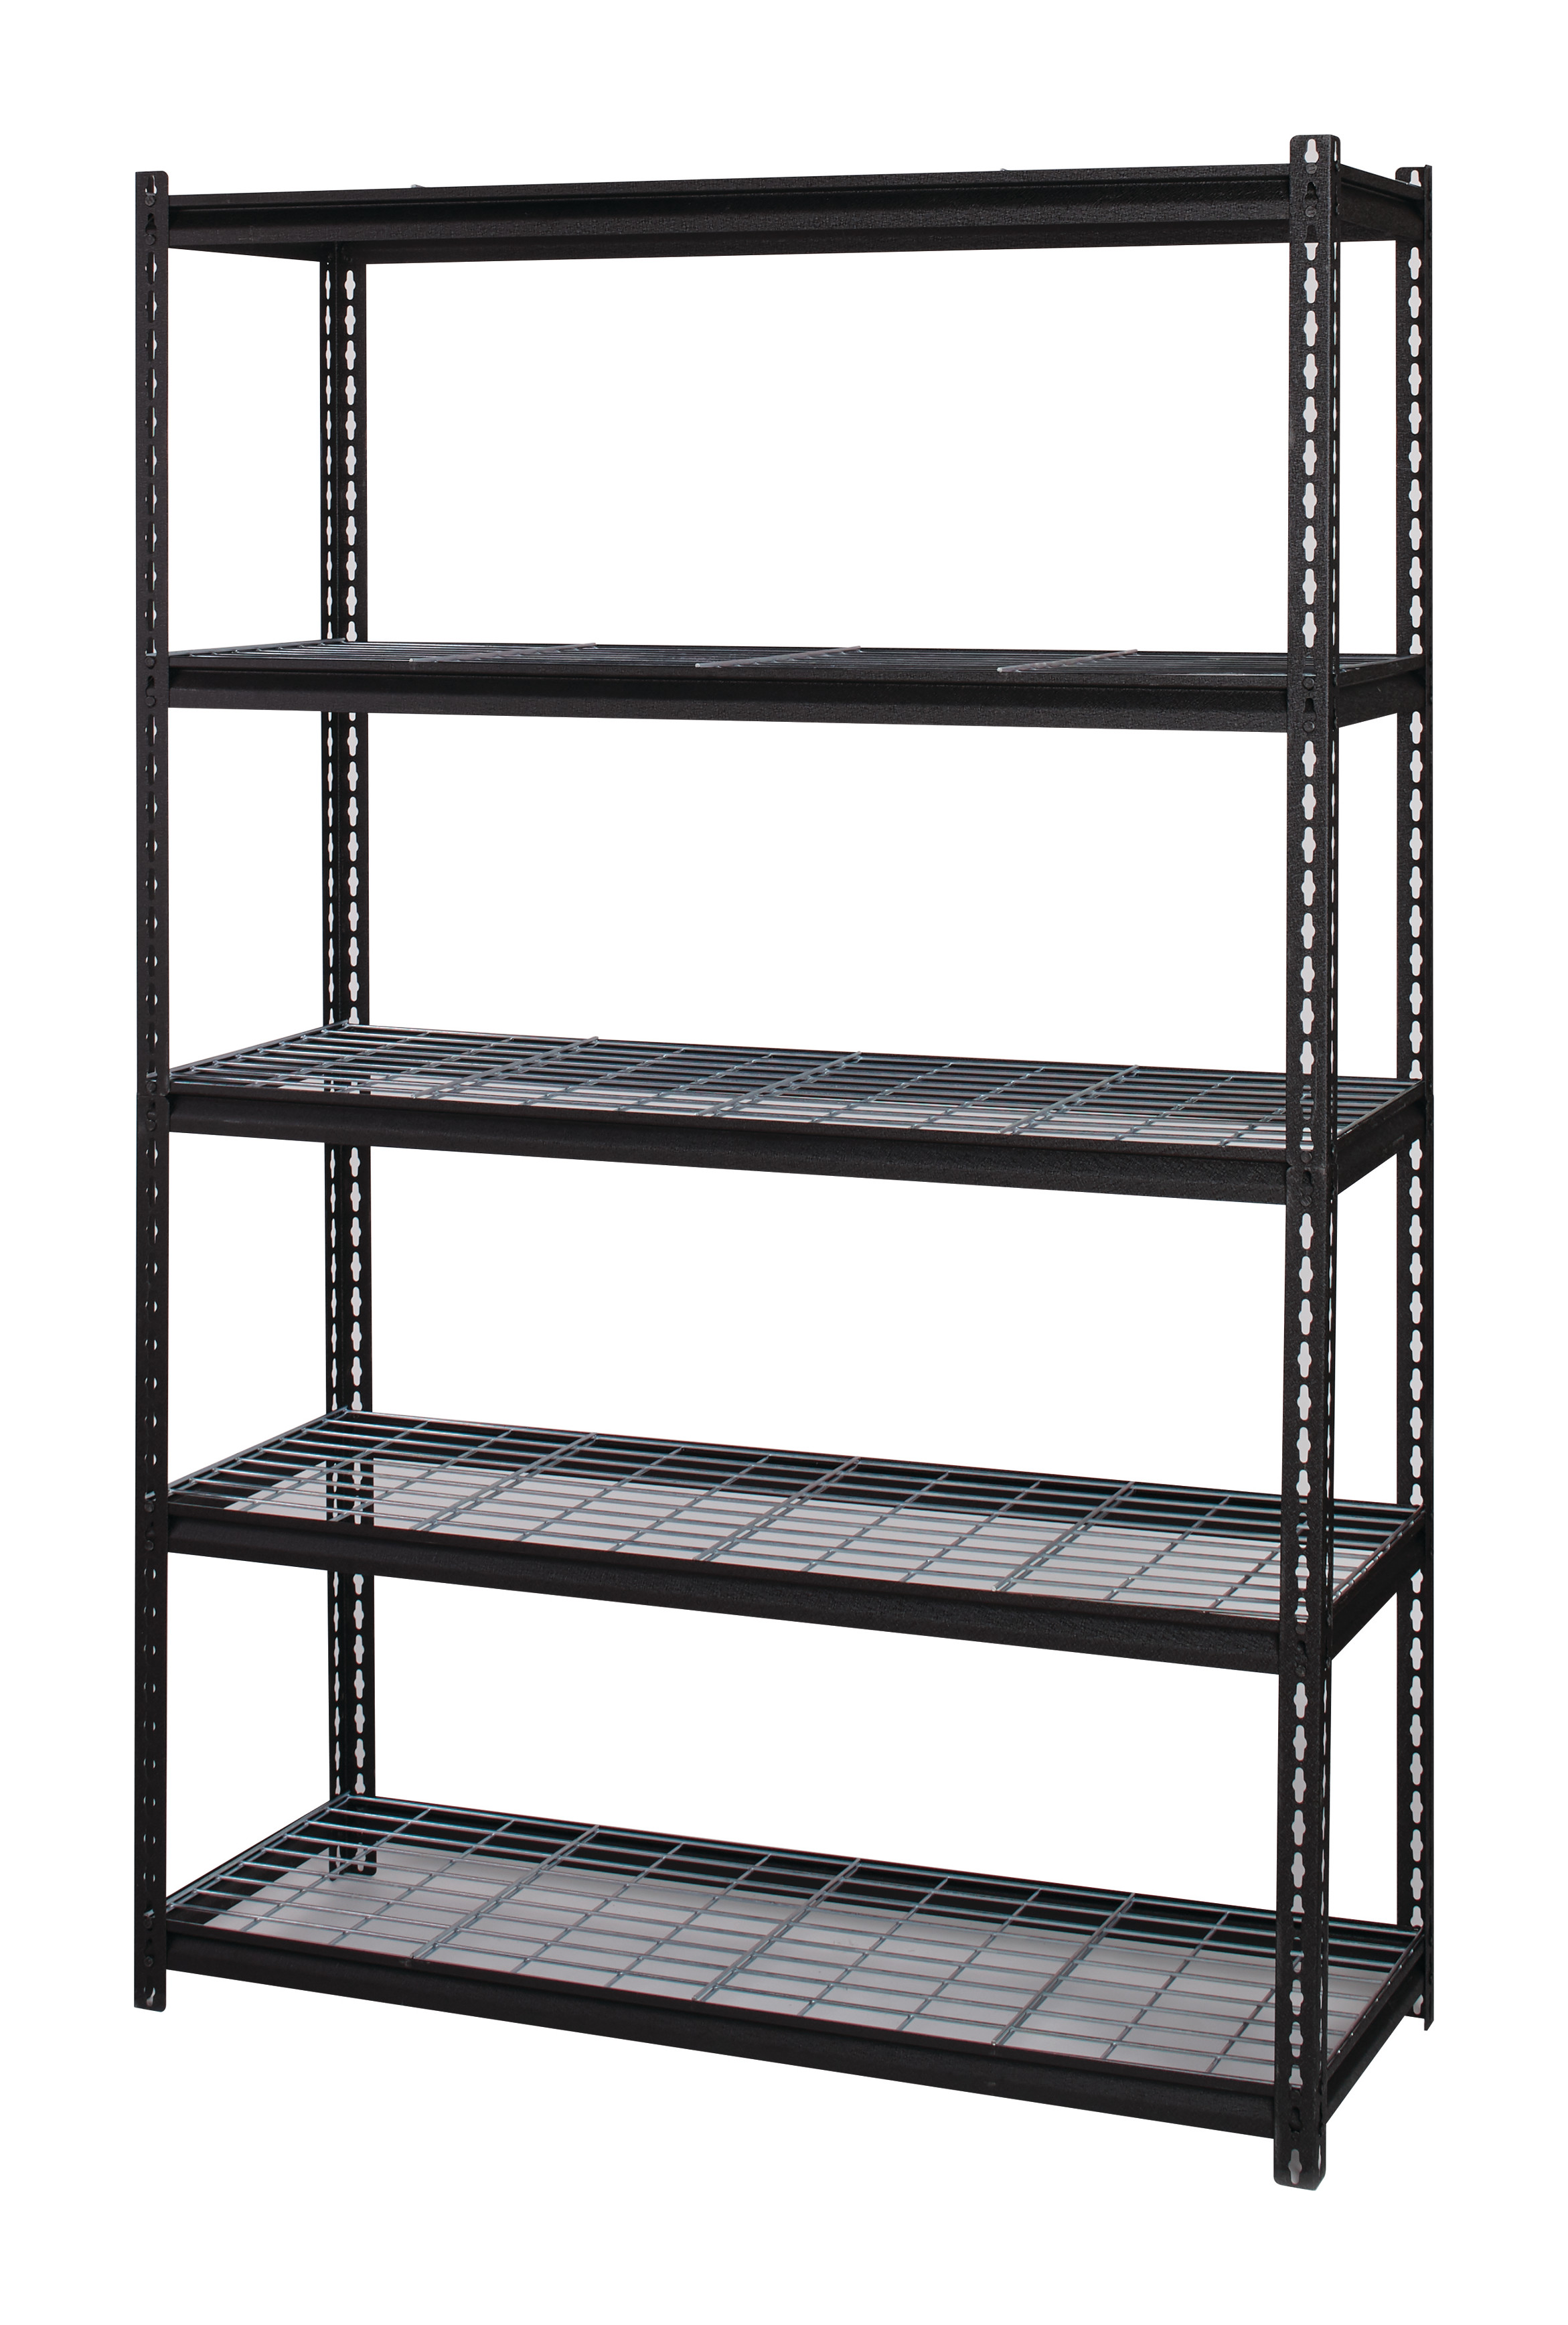 Iron Horse 2300 Riveted Wire Deck Shelving, 5-Shelf, 18Dx48Wx72H, Black - image 5 of 11